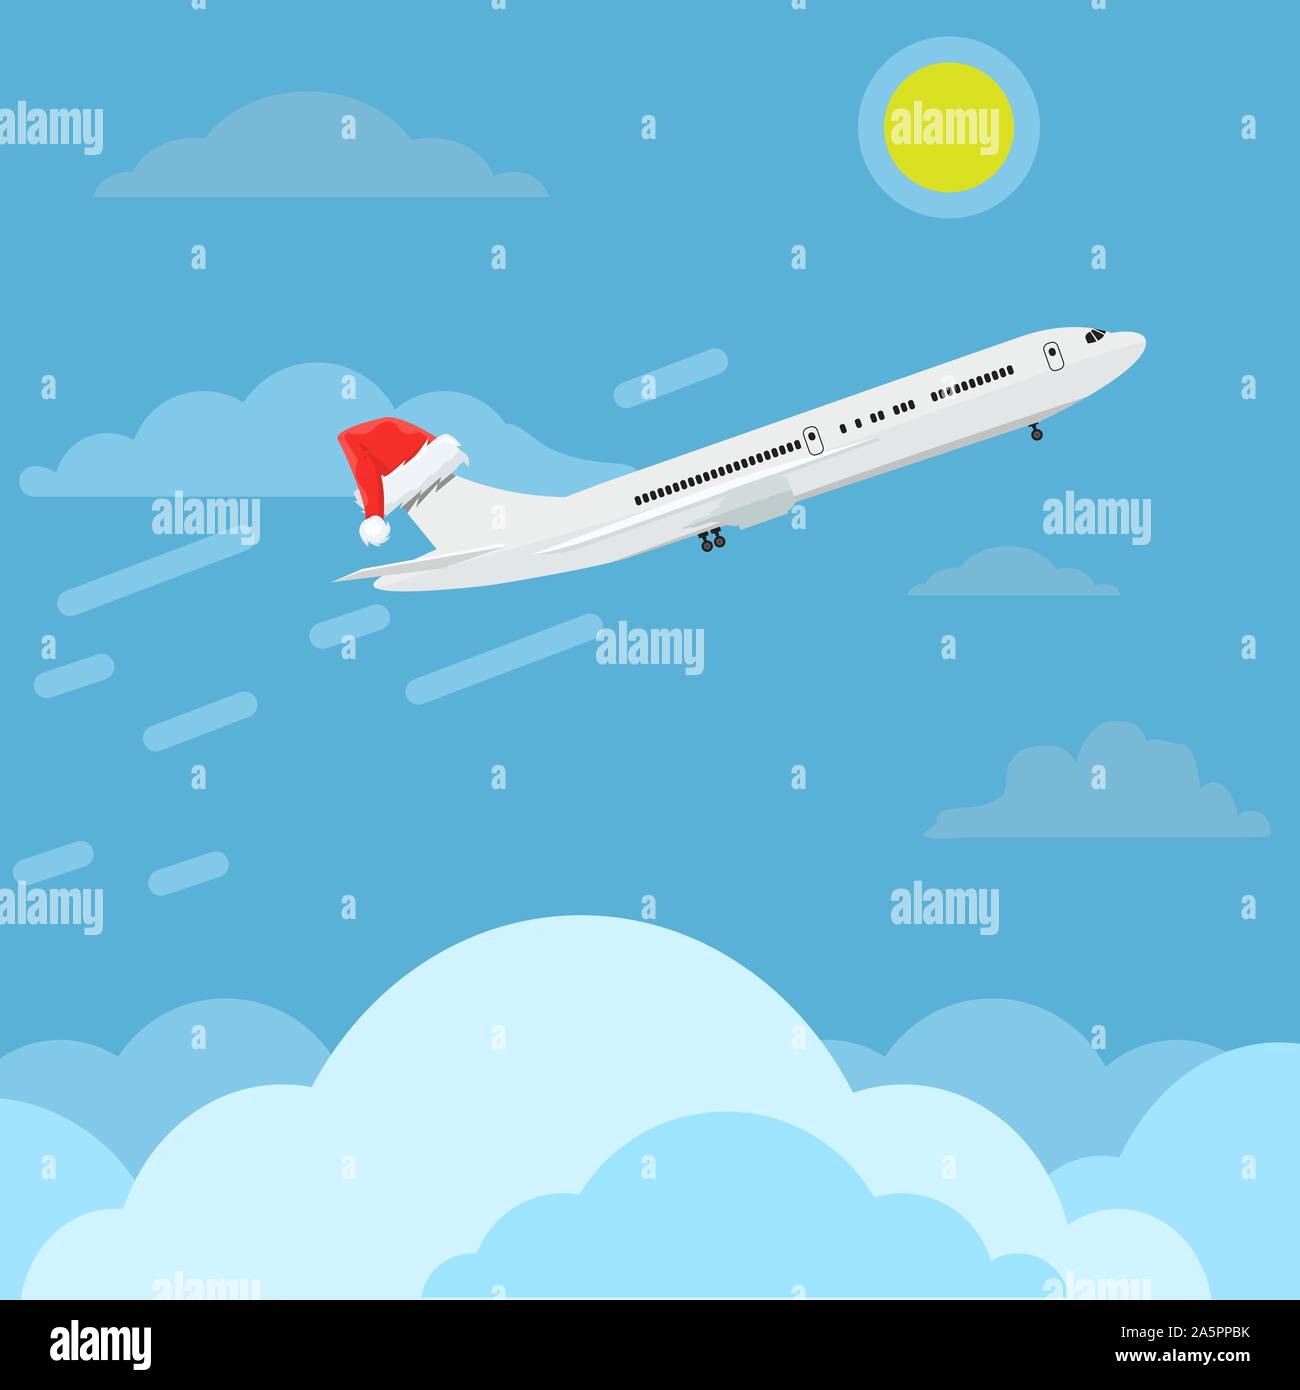 Airplane with santa claus cap or hat flying in sky. Travel and christmas concept ads design. Vector illustration. Stock Vector